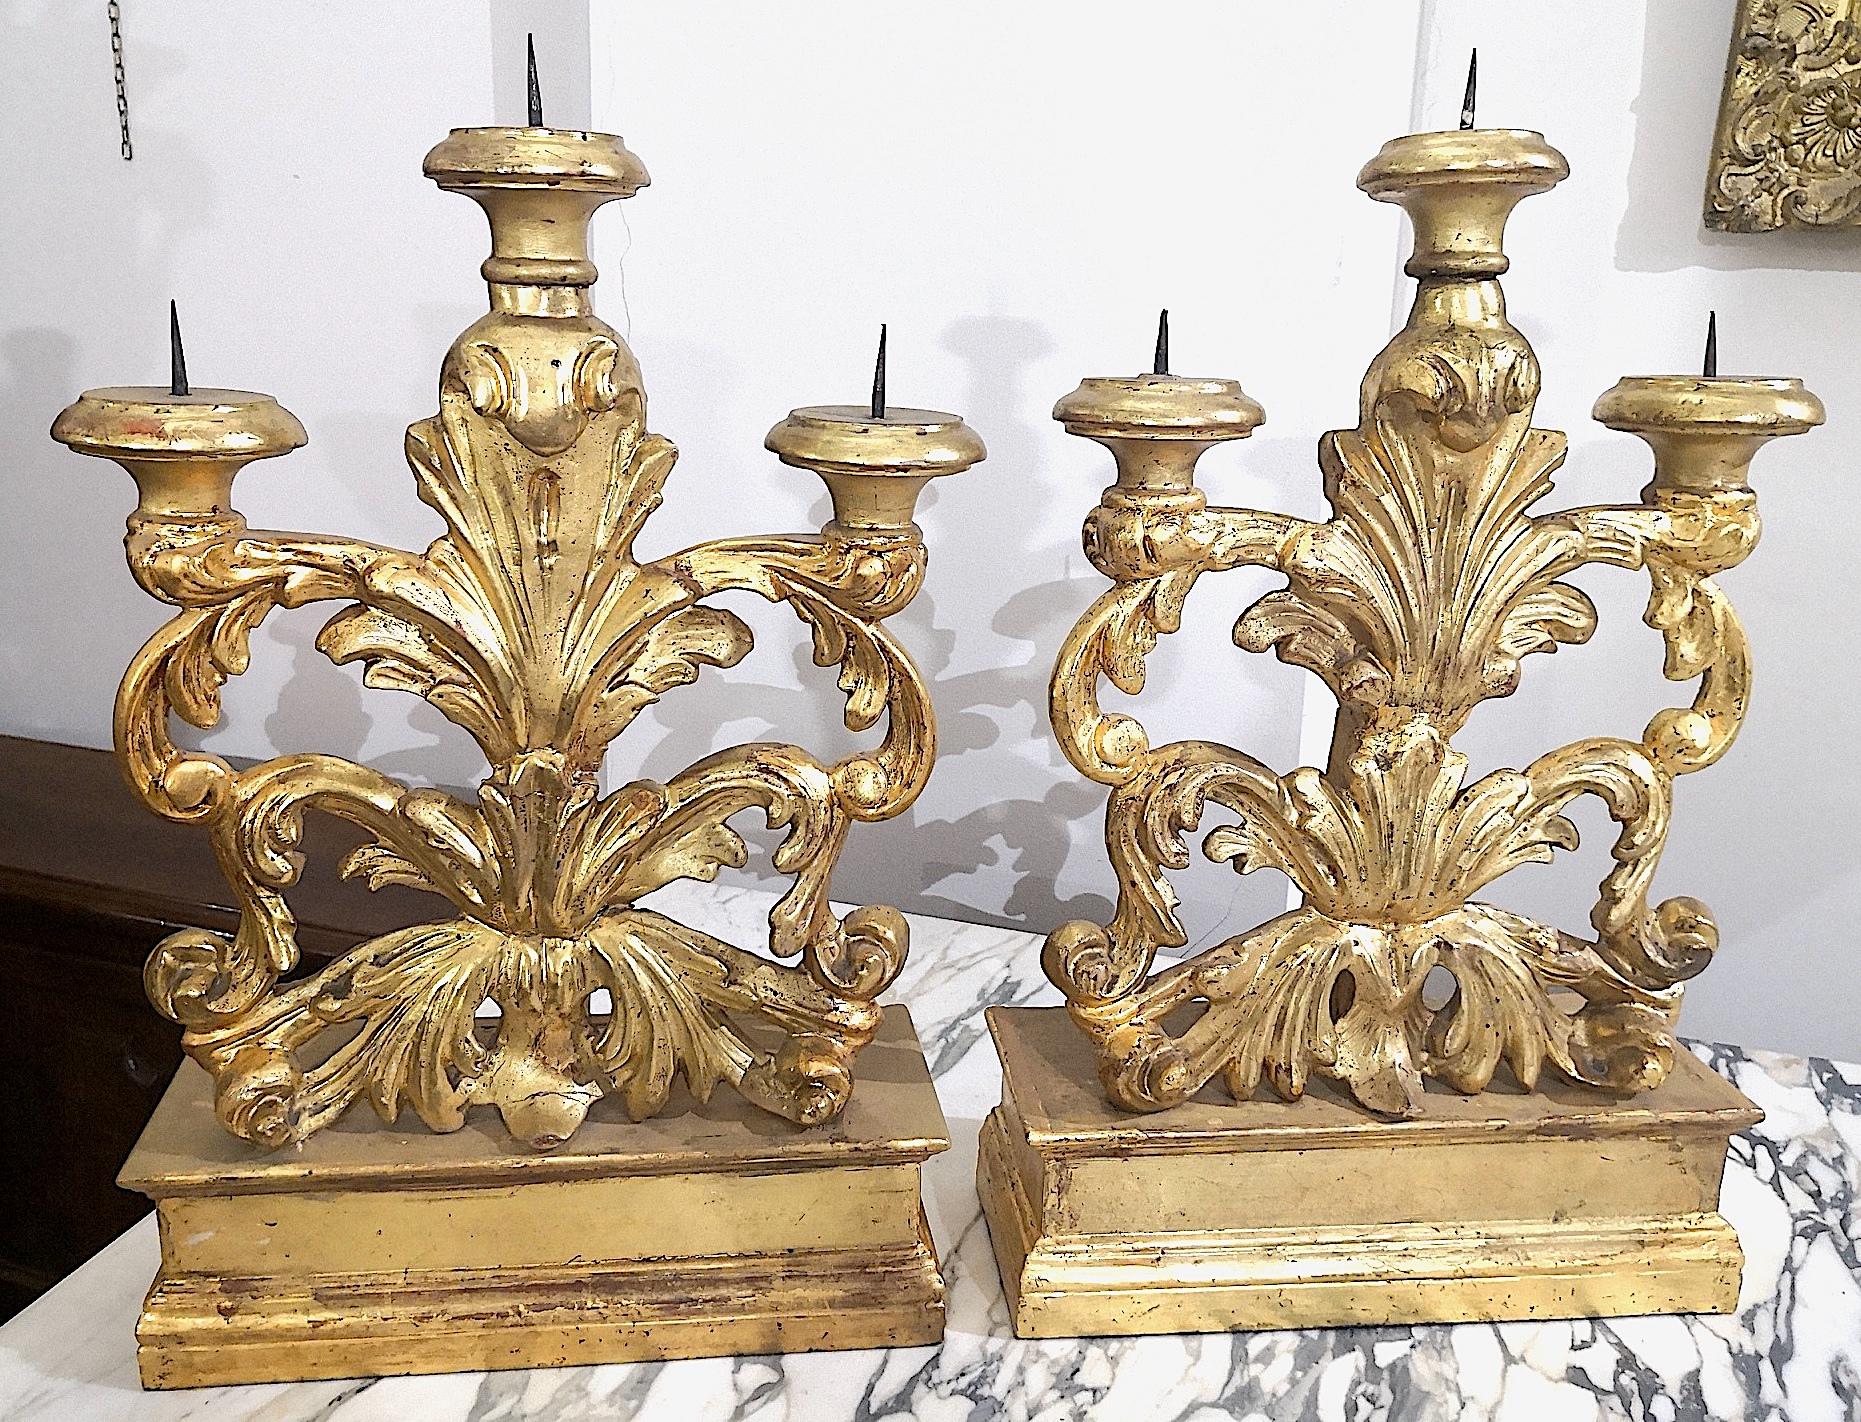 A wonderful pair of ornate Italian Florentine candelabra in the Louis XVI style. They are carved wood with Mecca gold color silver gilding and date from the mid to end of the 18th century. The gilding technique is known as 